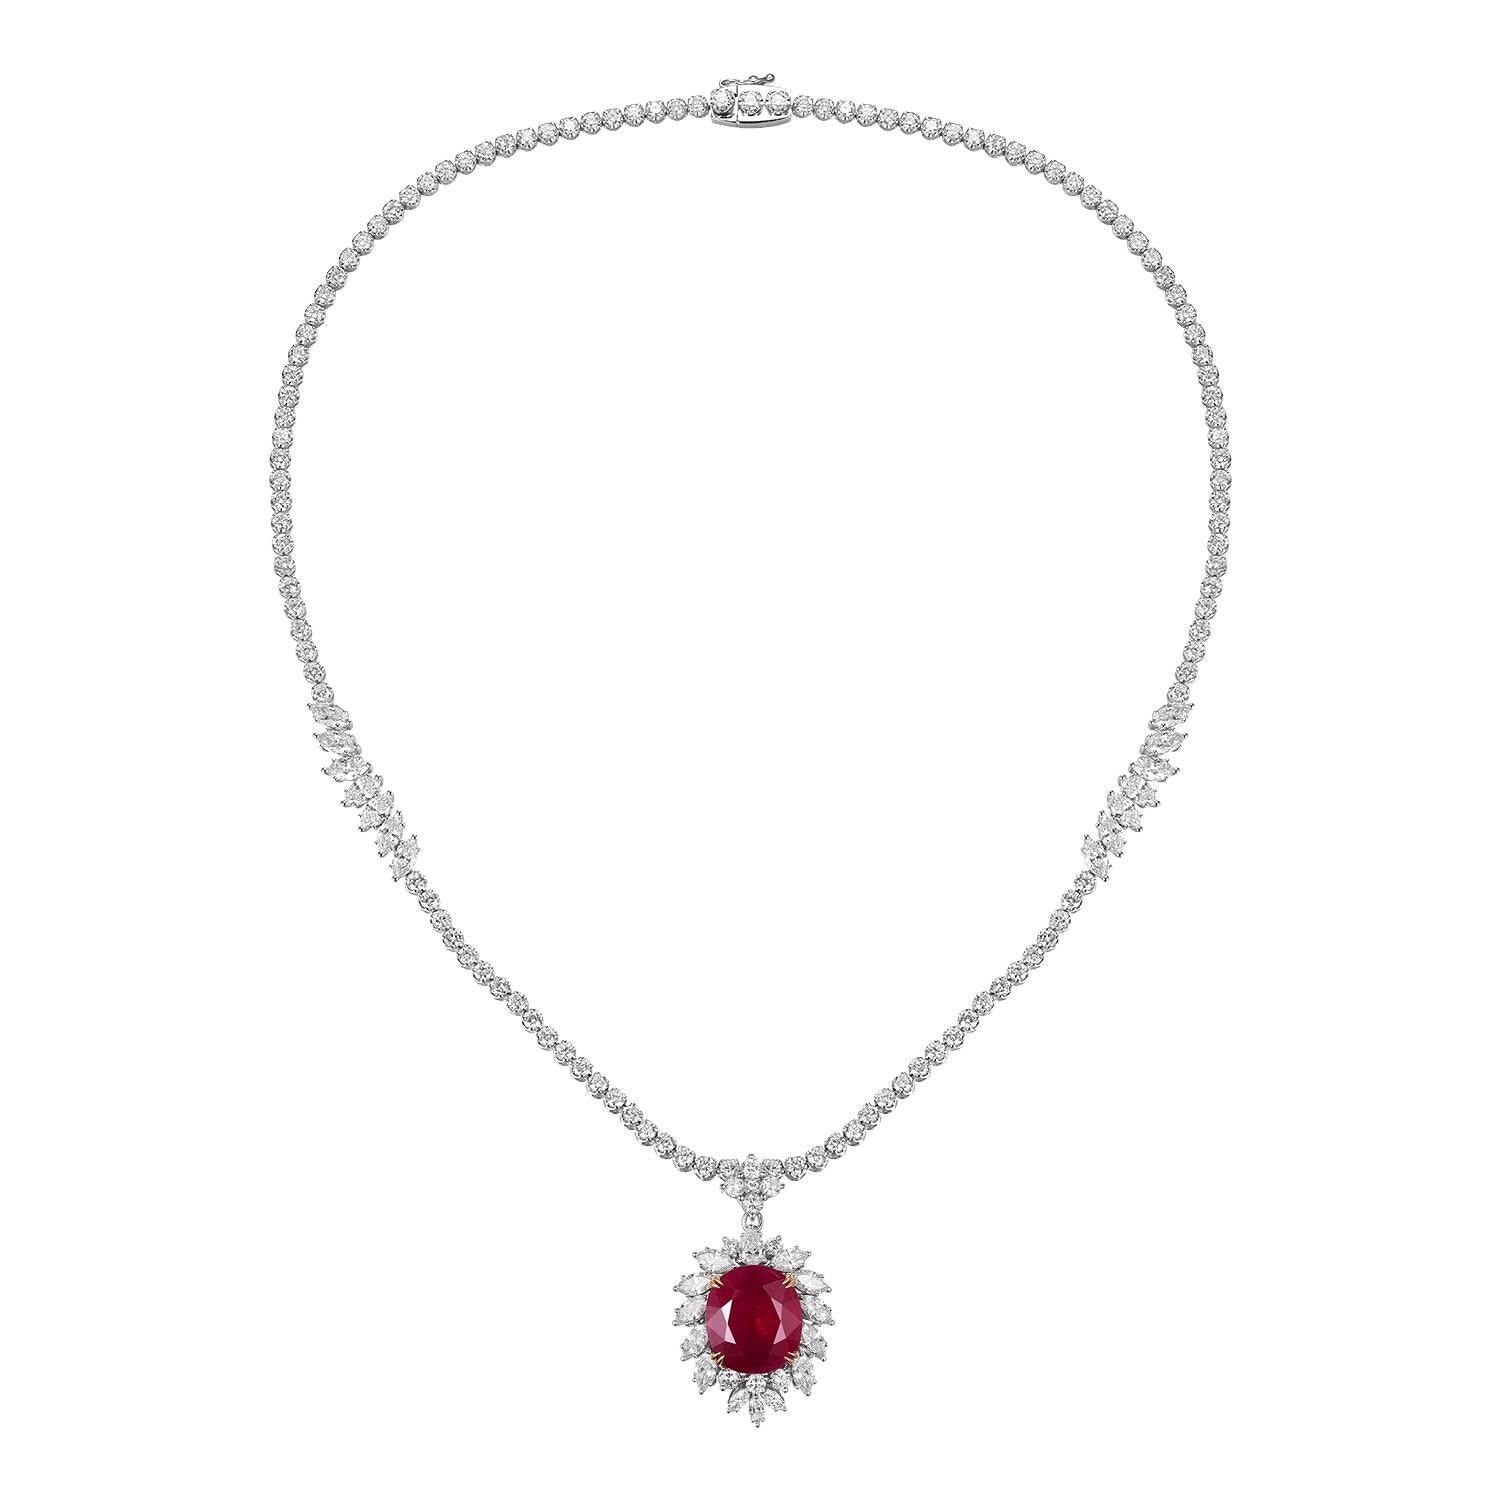 Experience the epitome of luxury and craftsmanship with this Ruby Diamond Necklace, a piece that defines elegance and versatility. Crafted in radiant 18 karat white gold, this necklace stands out as a testament to impeccable artistry and a love for